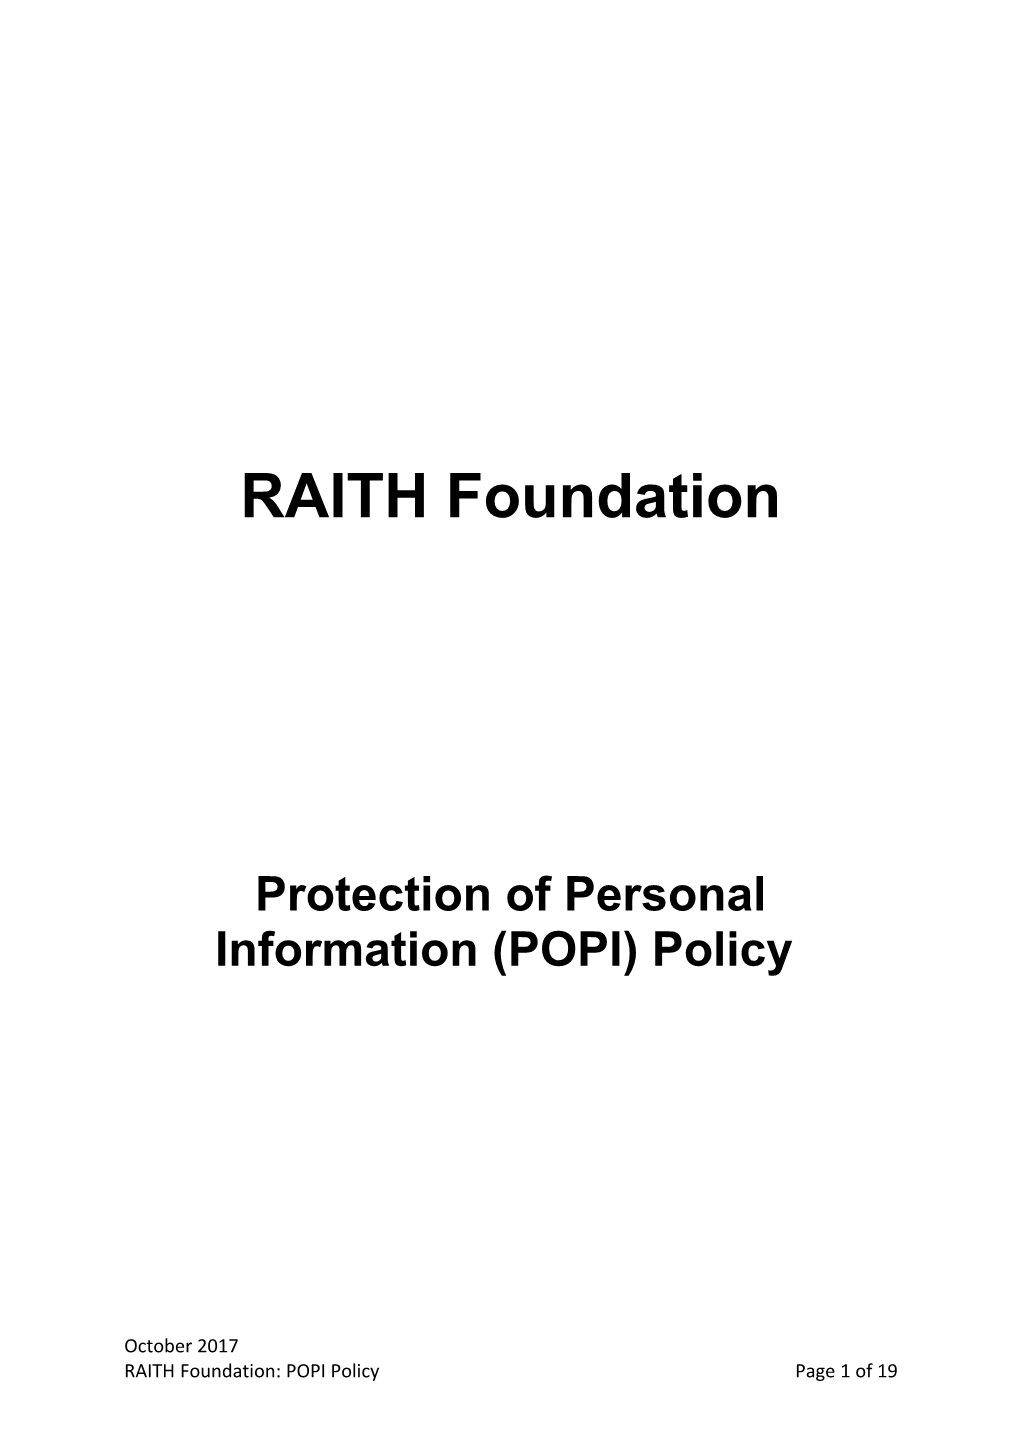 Protection of Personal Information (POPI) Policy